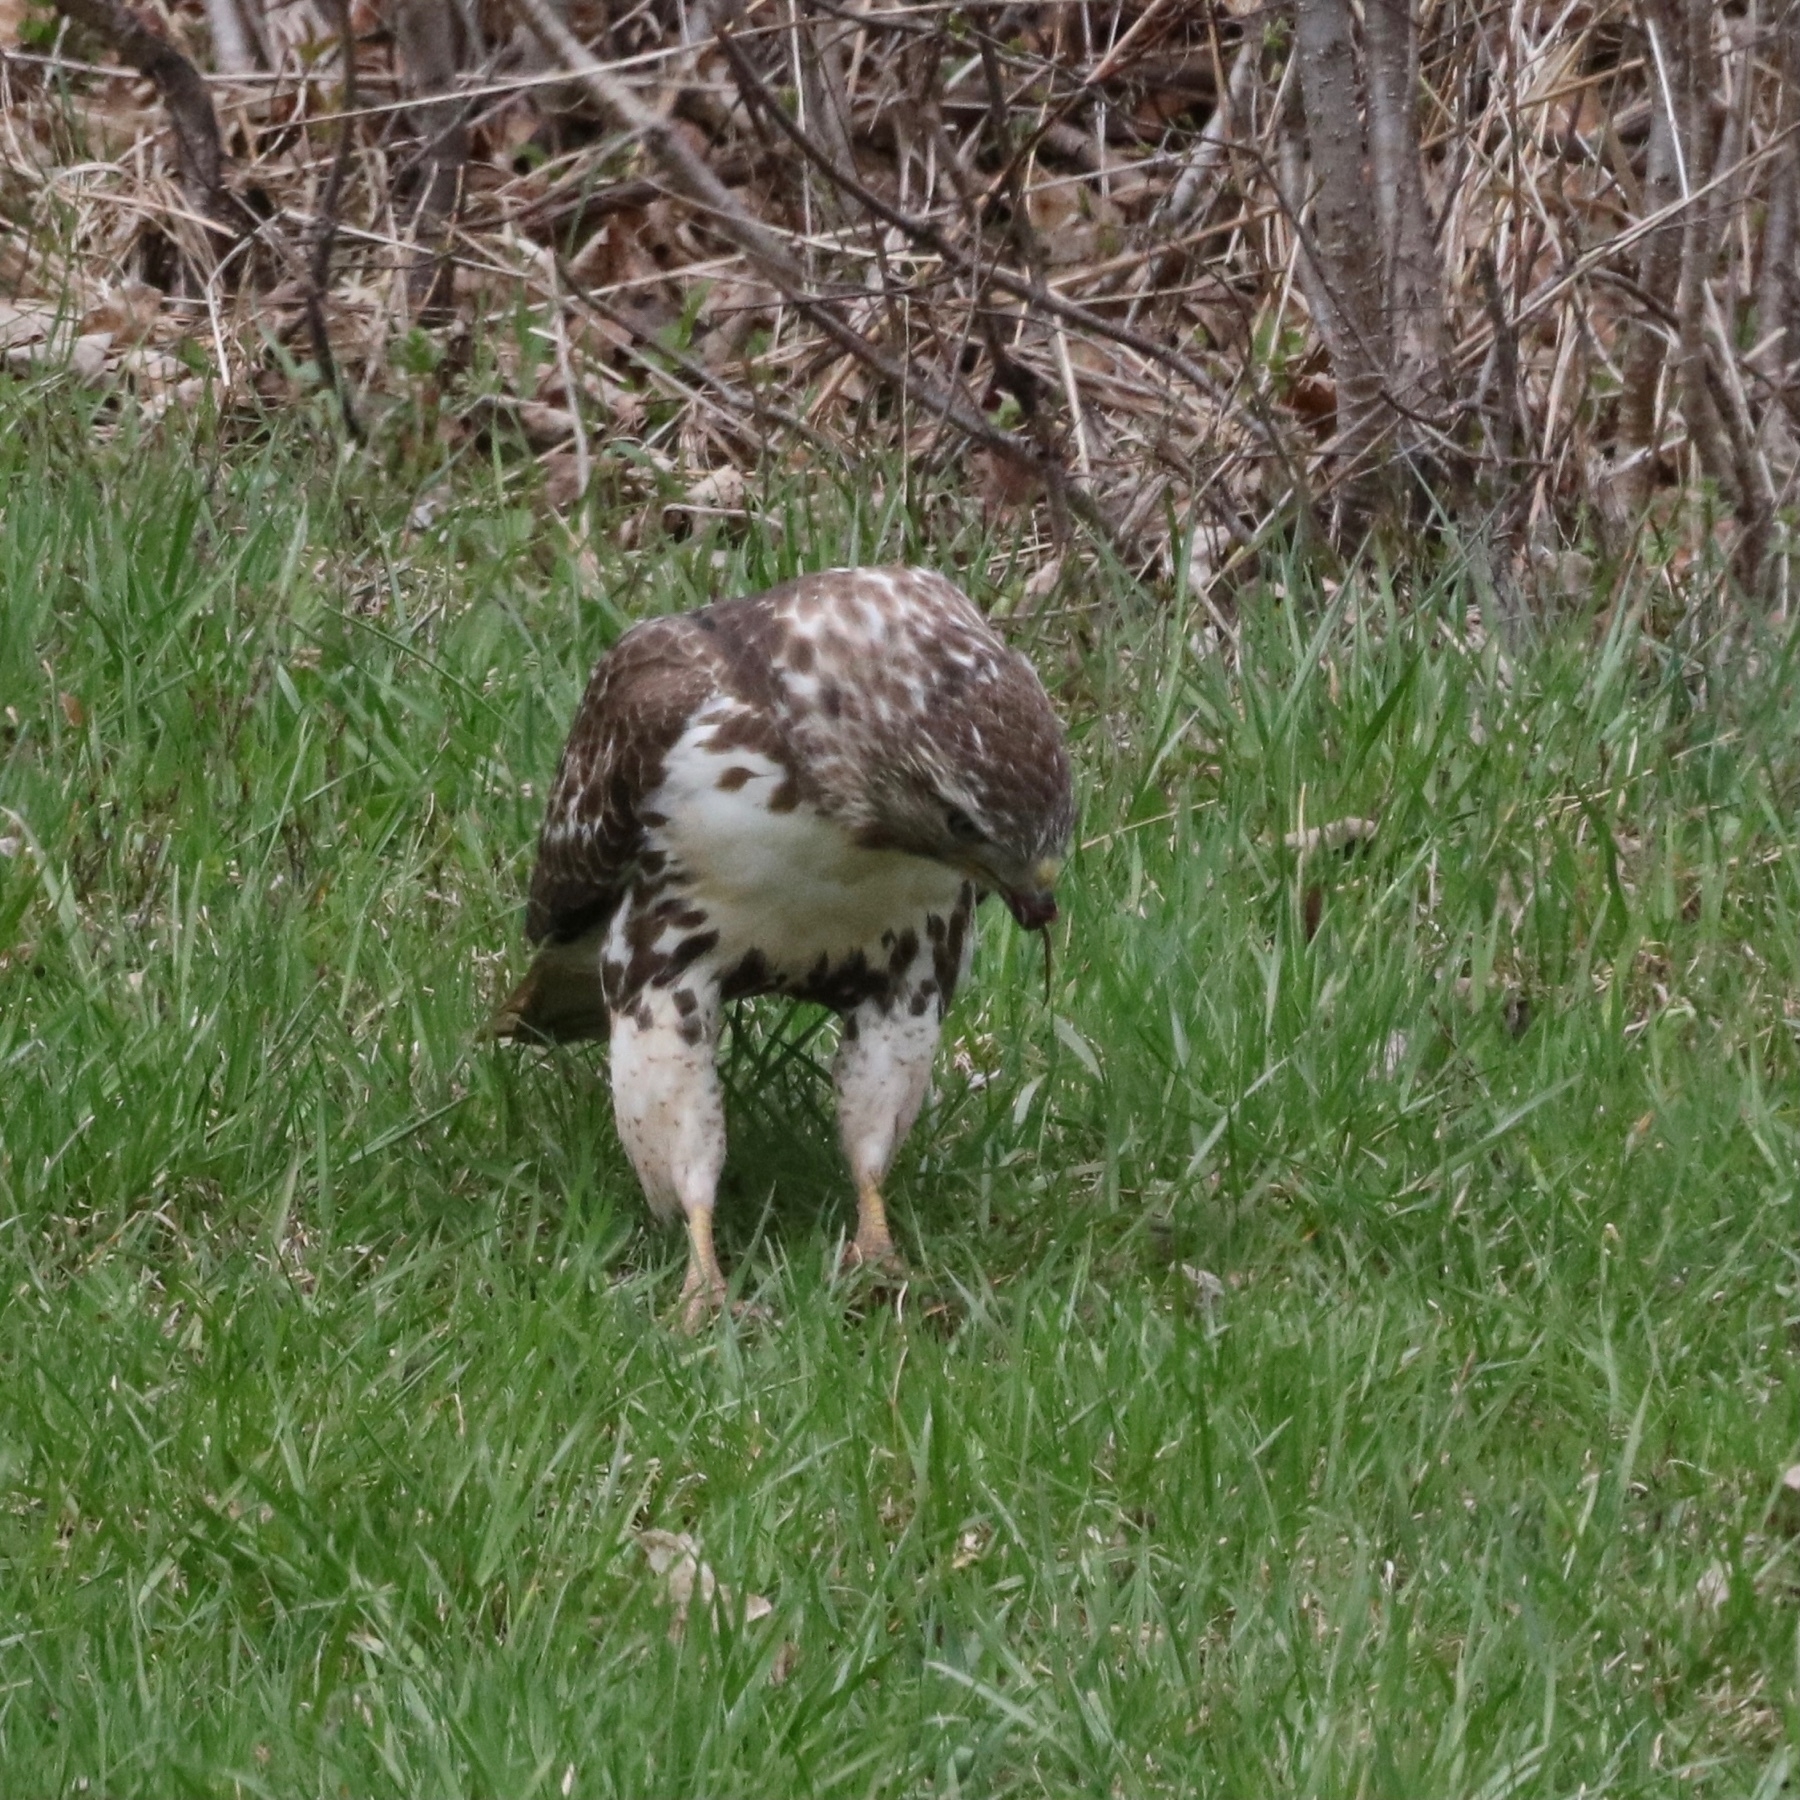 large hawk standing on grass. there is a worm hanging from its mouth